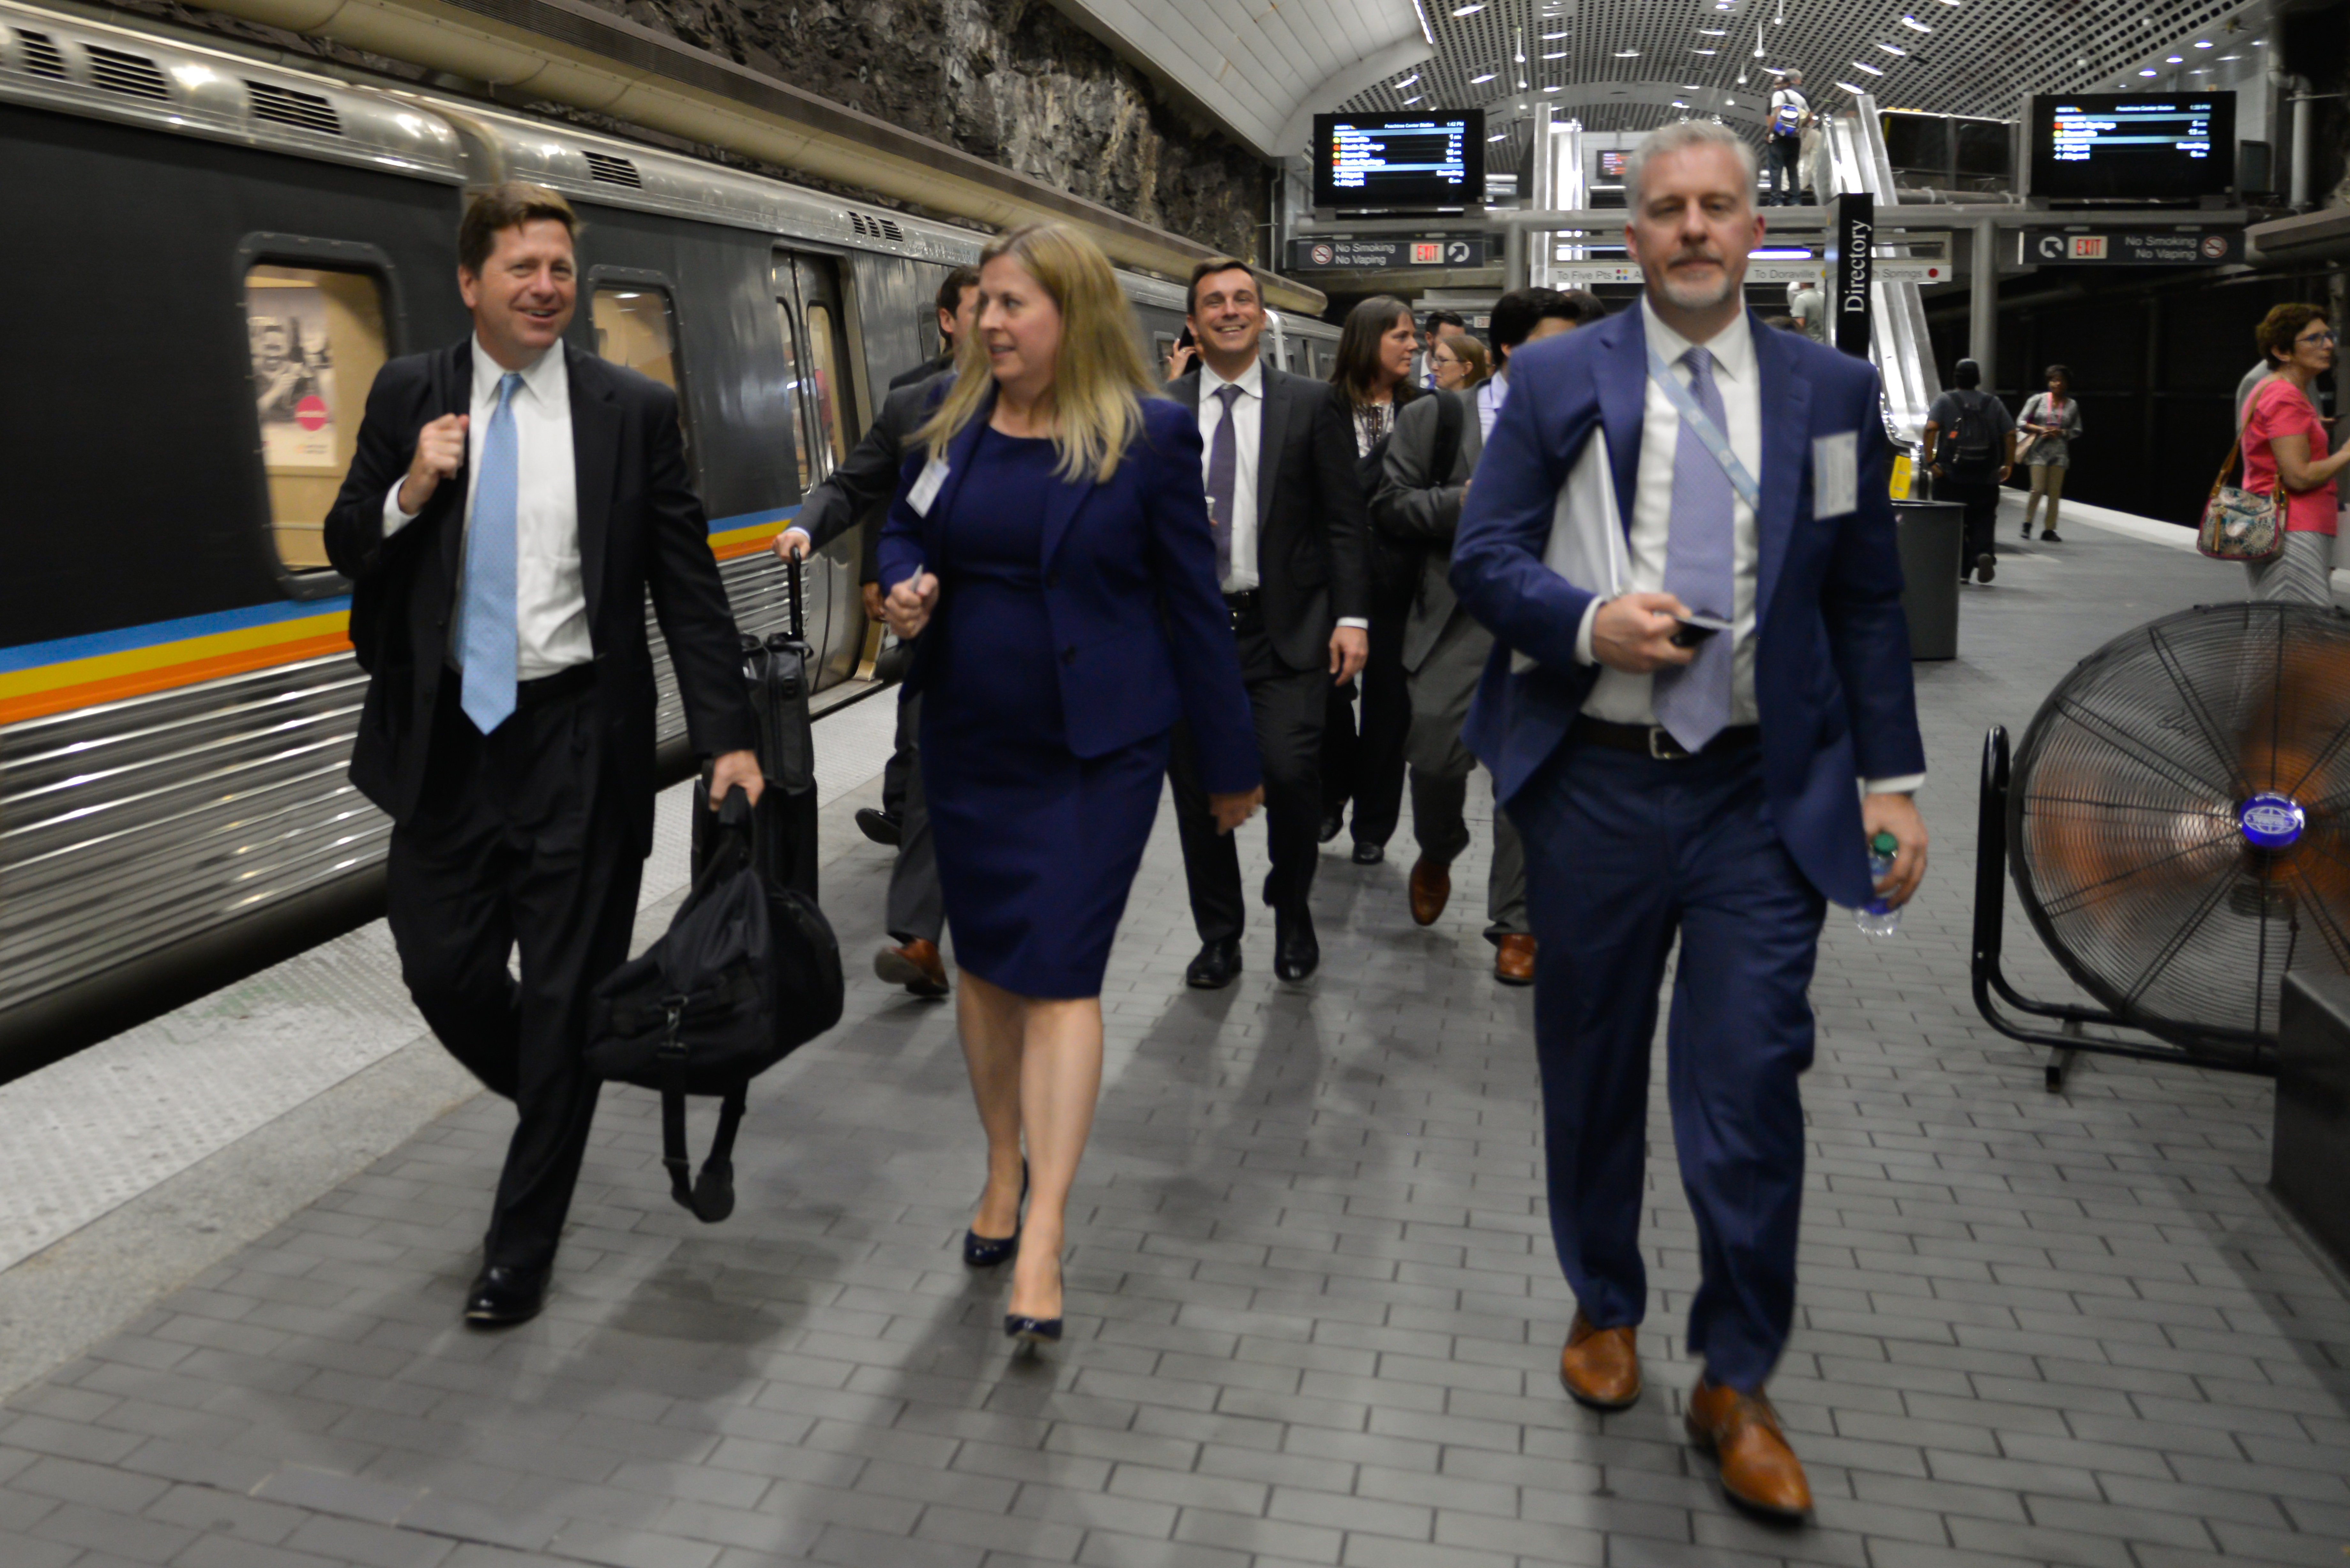 Commissioners walking through subway